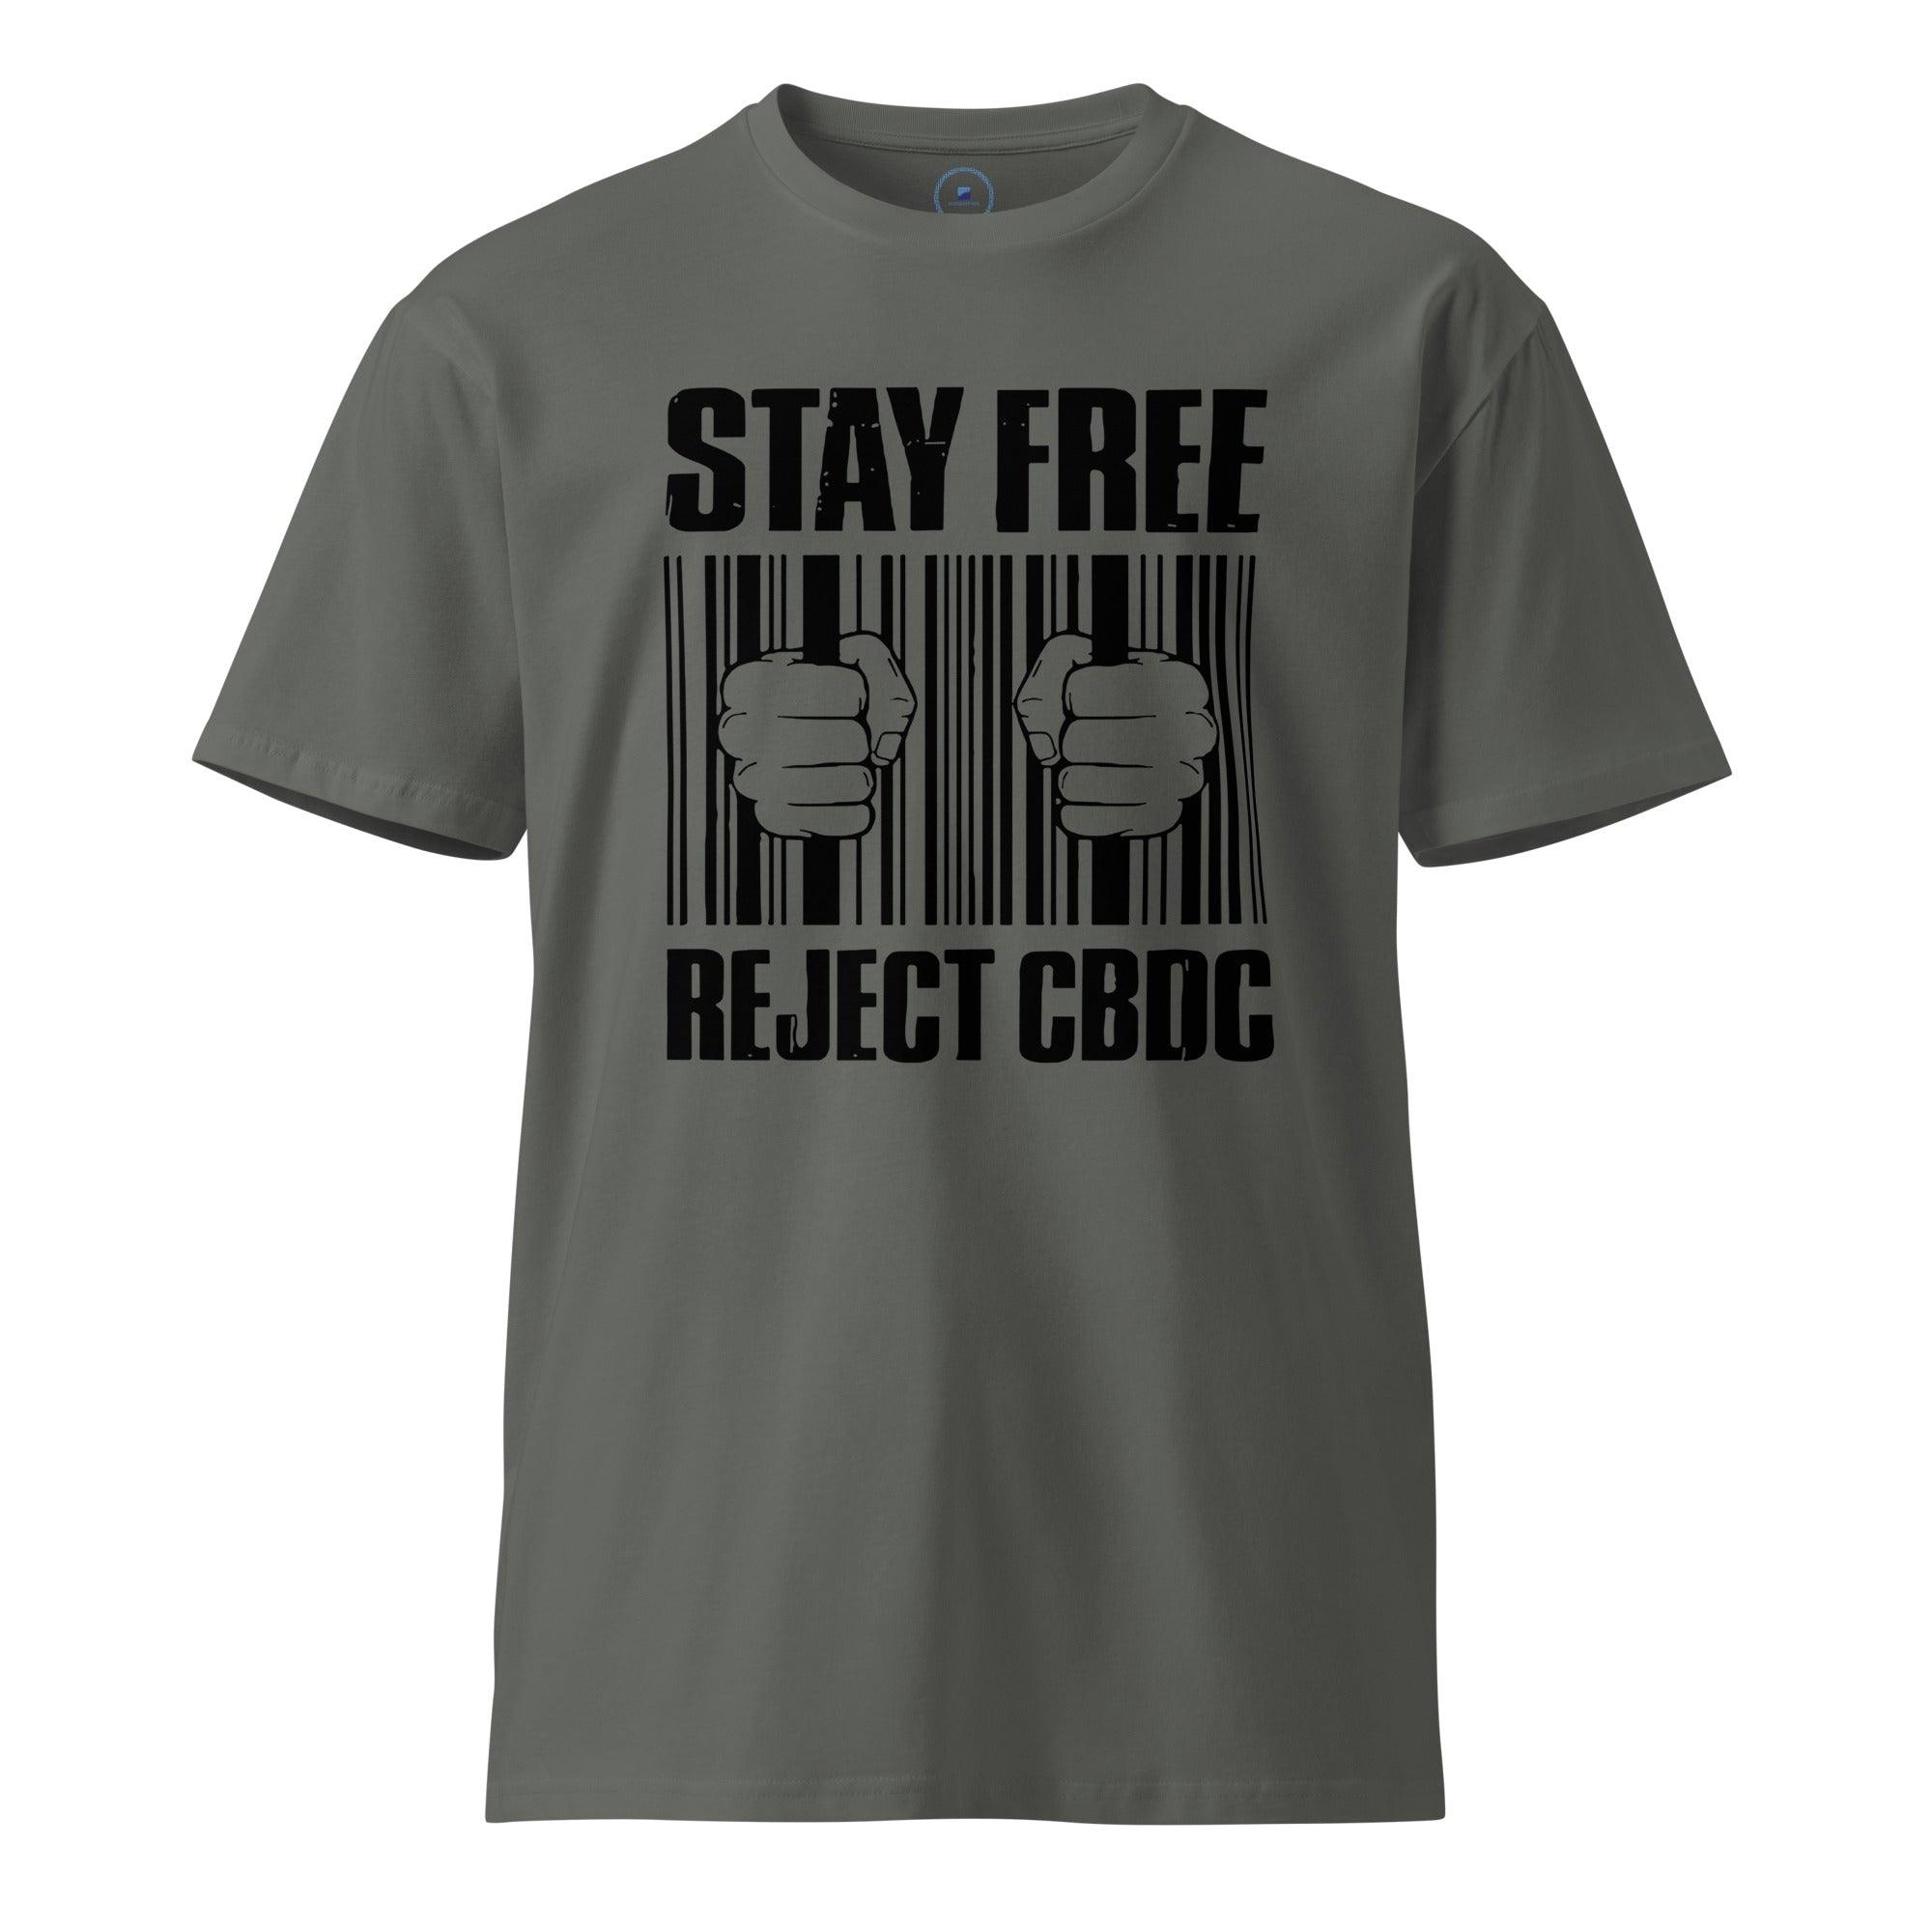 Reject CBDC T-Shirt - InvestmenTees